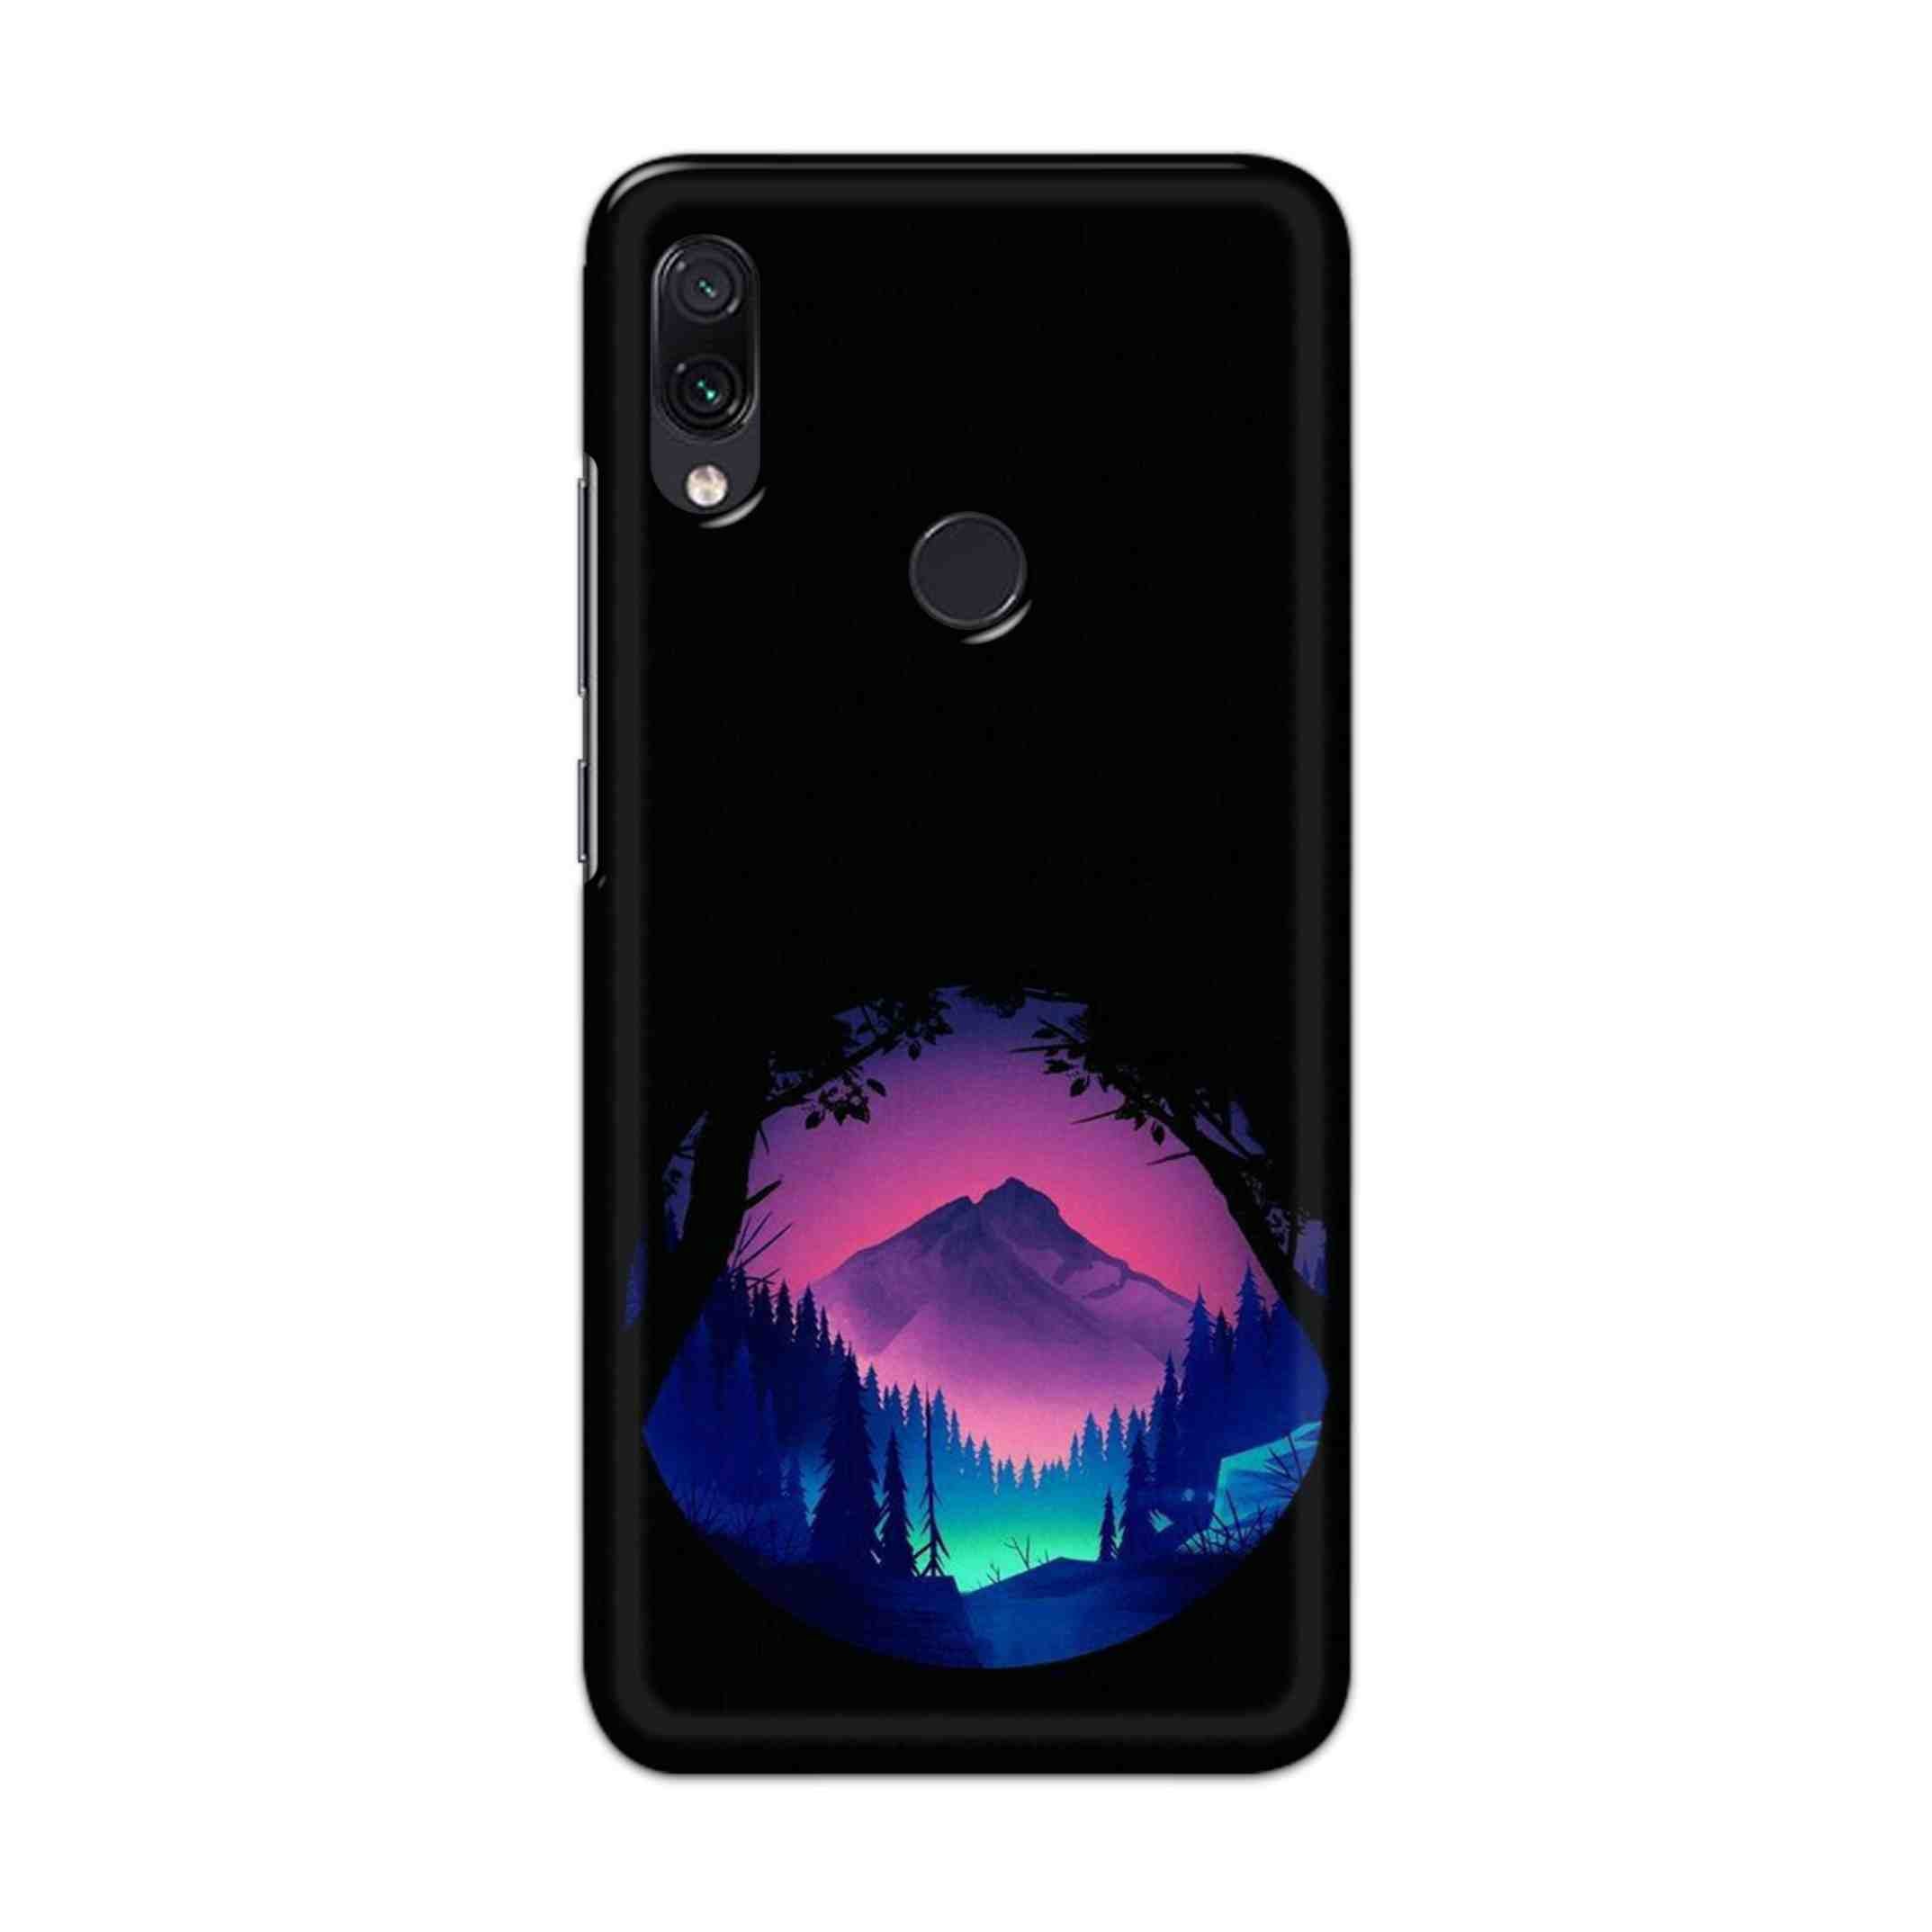 Buy Neon Tables Hard Back Mobile Phone Case Cover For Xiaomi Redmi 7 Online